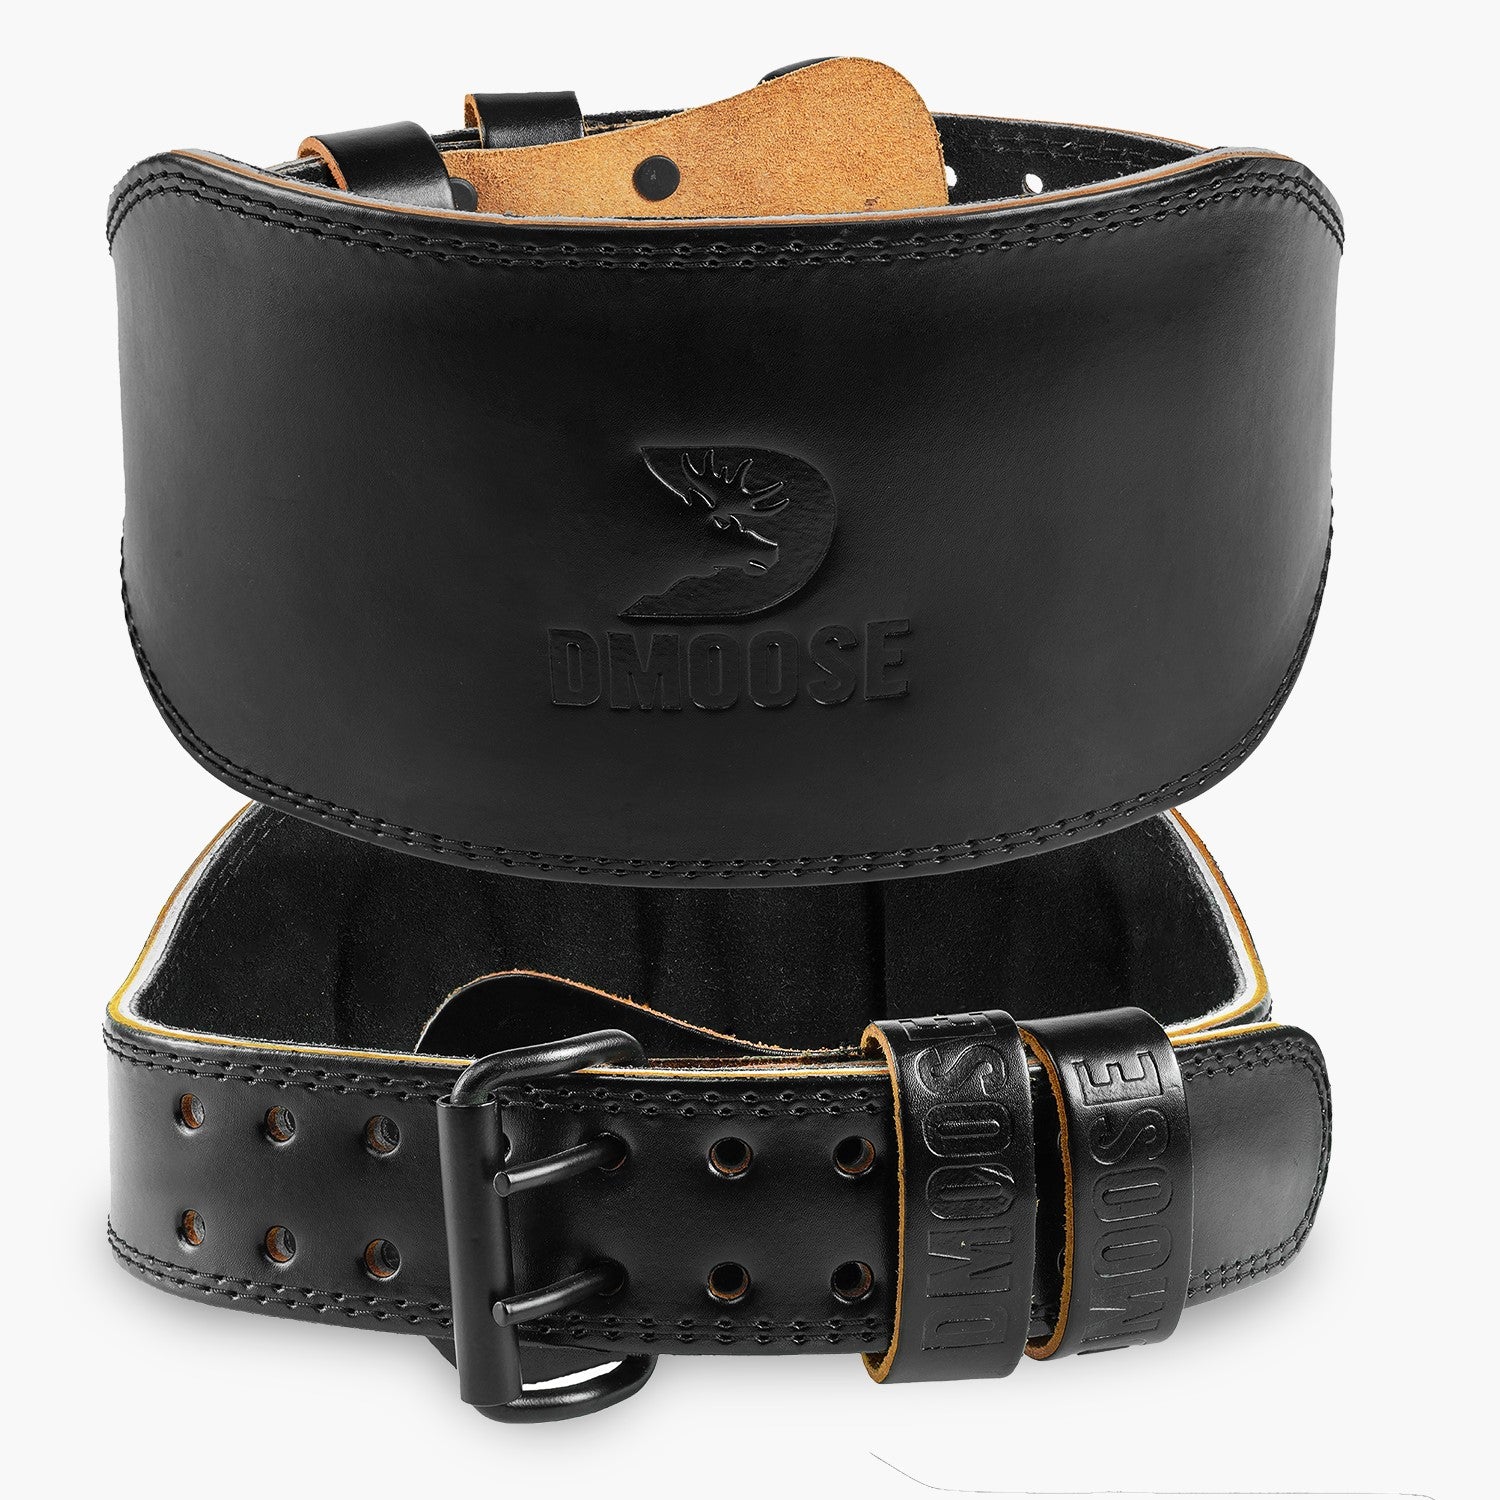 6 Leather Weightlifting Belt